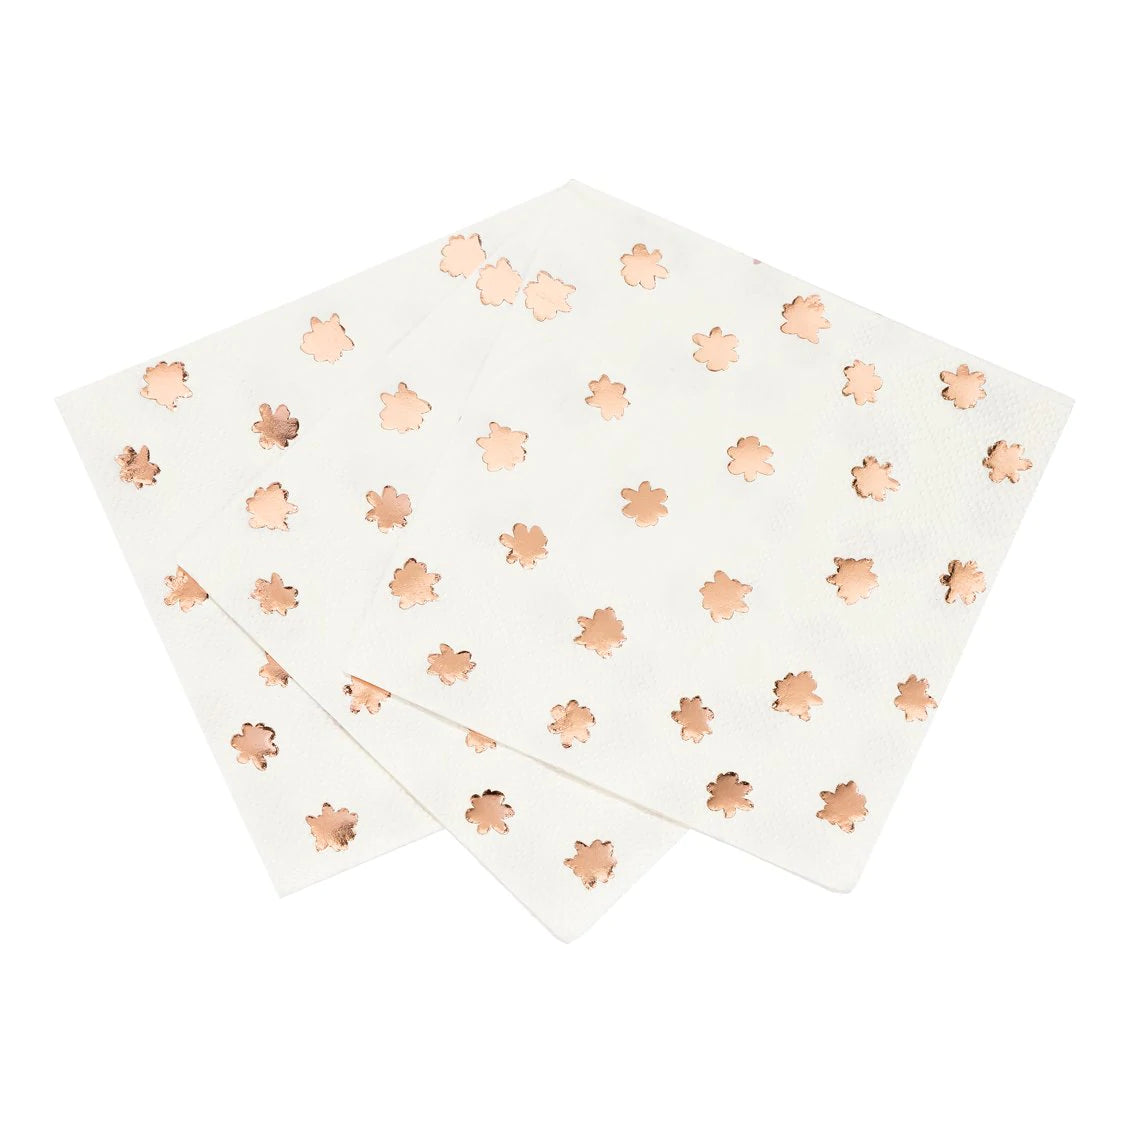 Party Porcelain Rose Gold Napkin by Talking Tables. Pretty rose gold themed party napkins